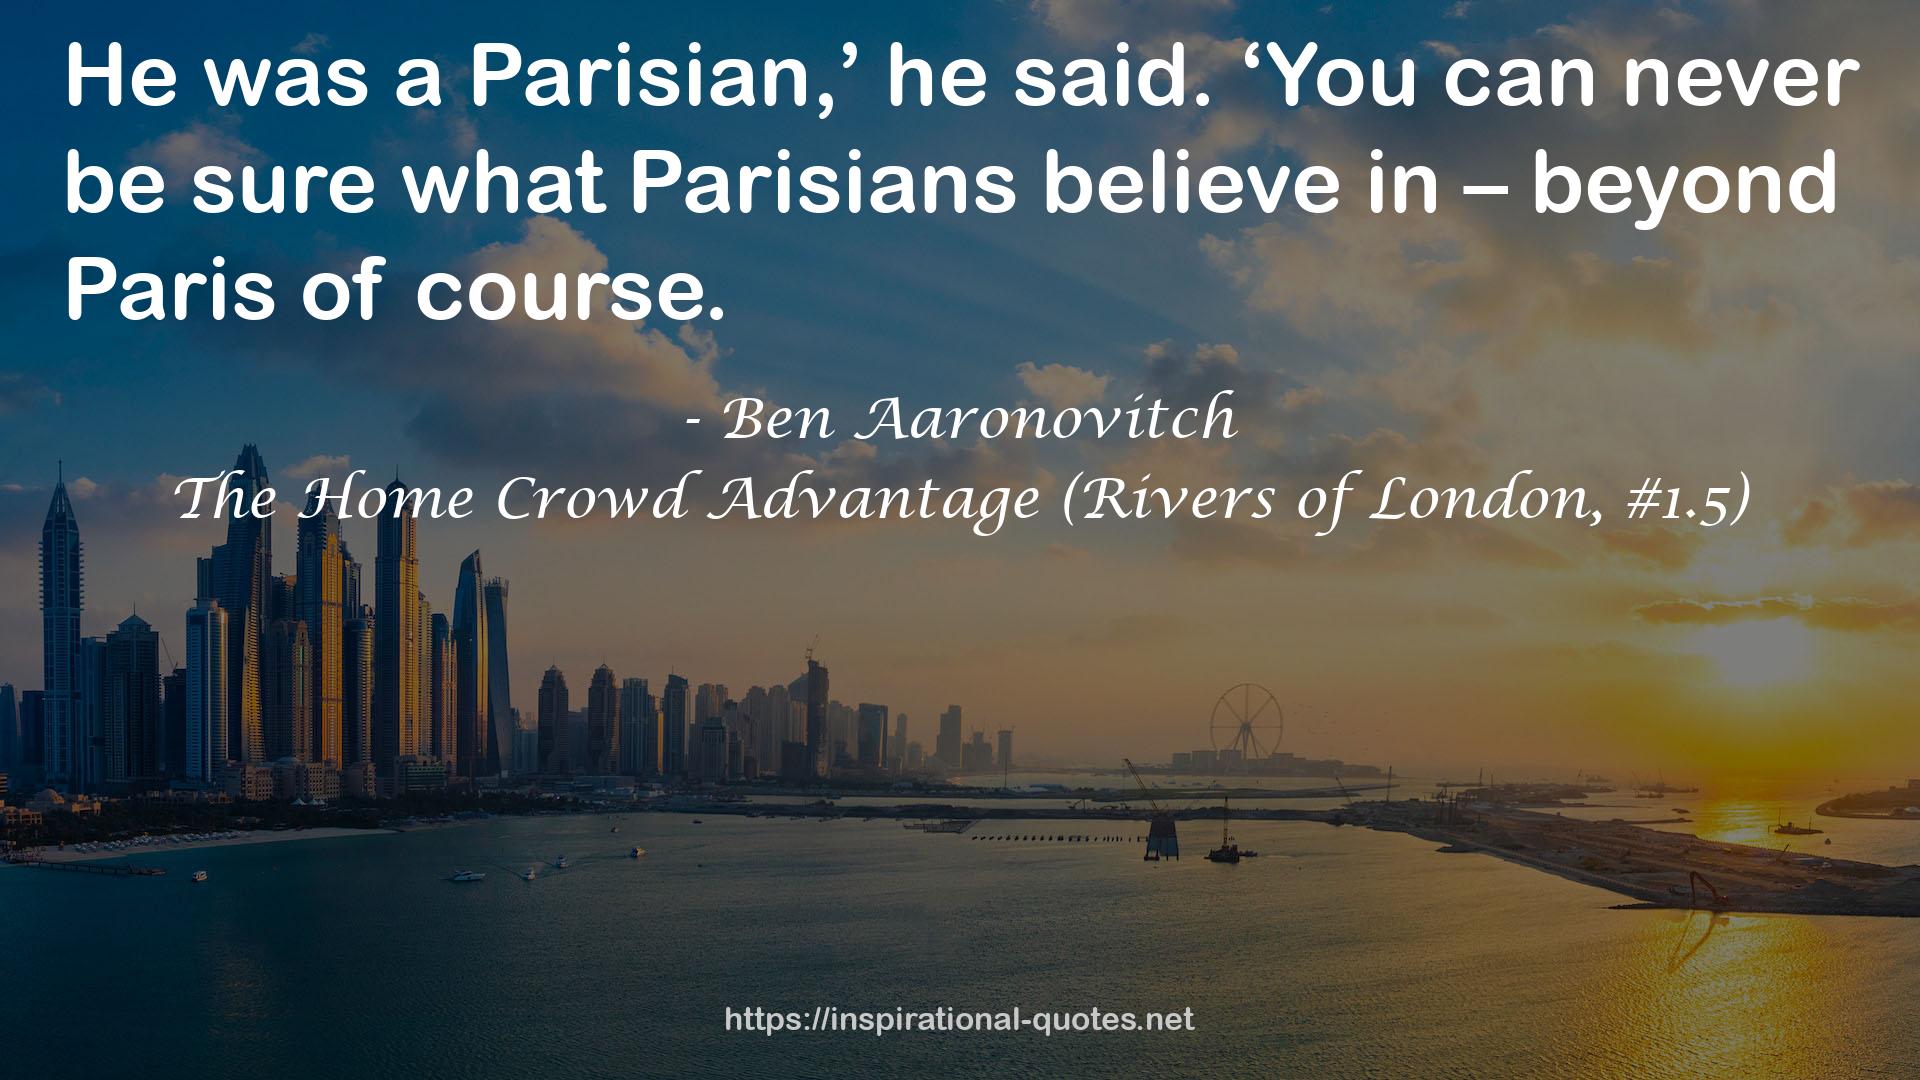 The Home Crowd Advantage (Rivers of London, #1.5) QUOTES